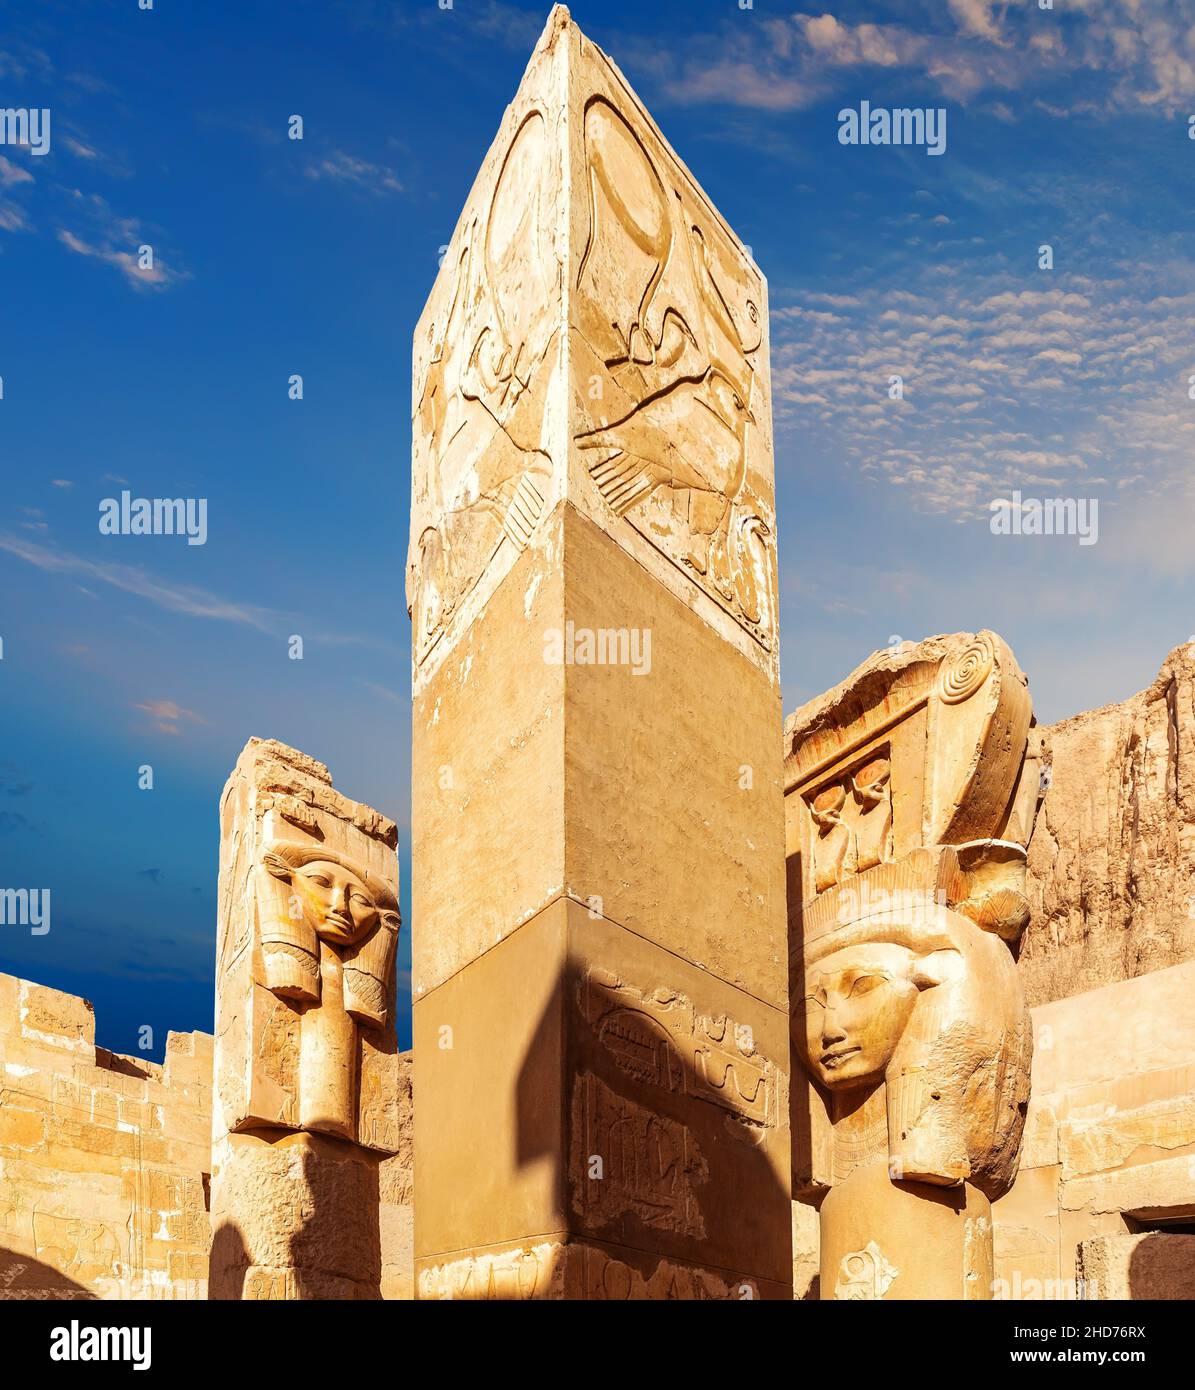 Statues of Goddess Hathor and columns of Mortuary Temple of Hatshepsut, Luxor, Egypt. Stock Photo